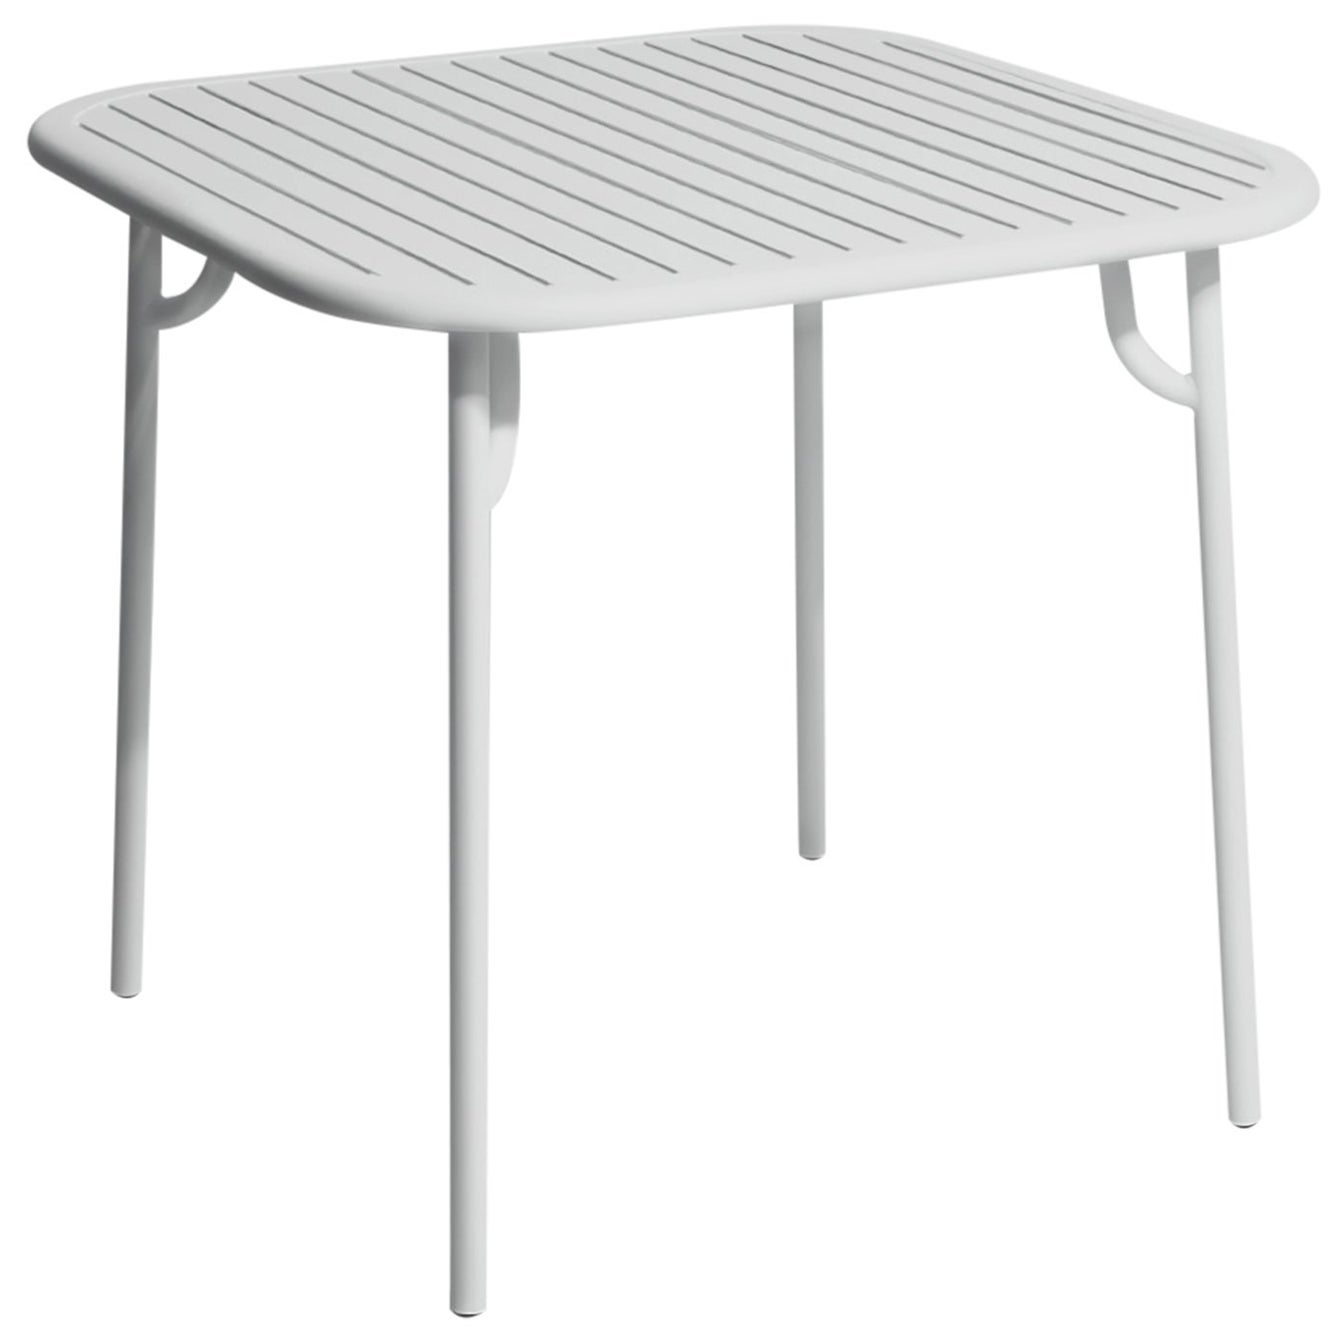 Petite Friture Week-End Square Dining Table in Pearl Grey Aluminium with Slats For Sale